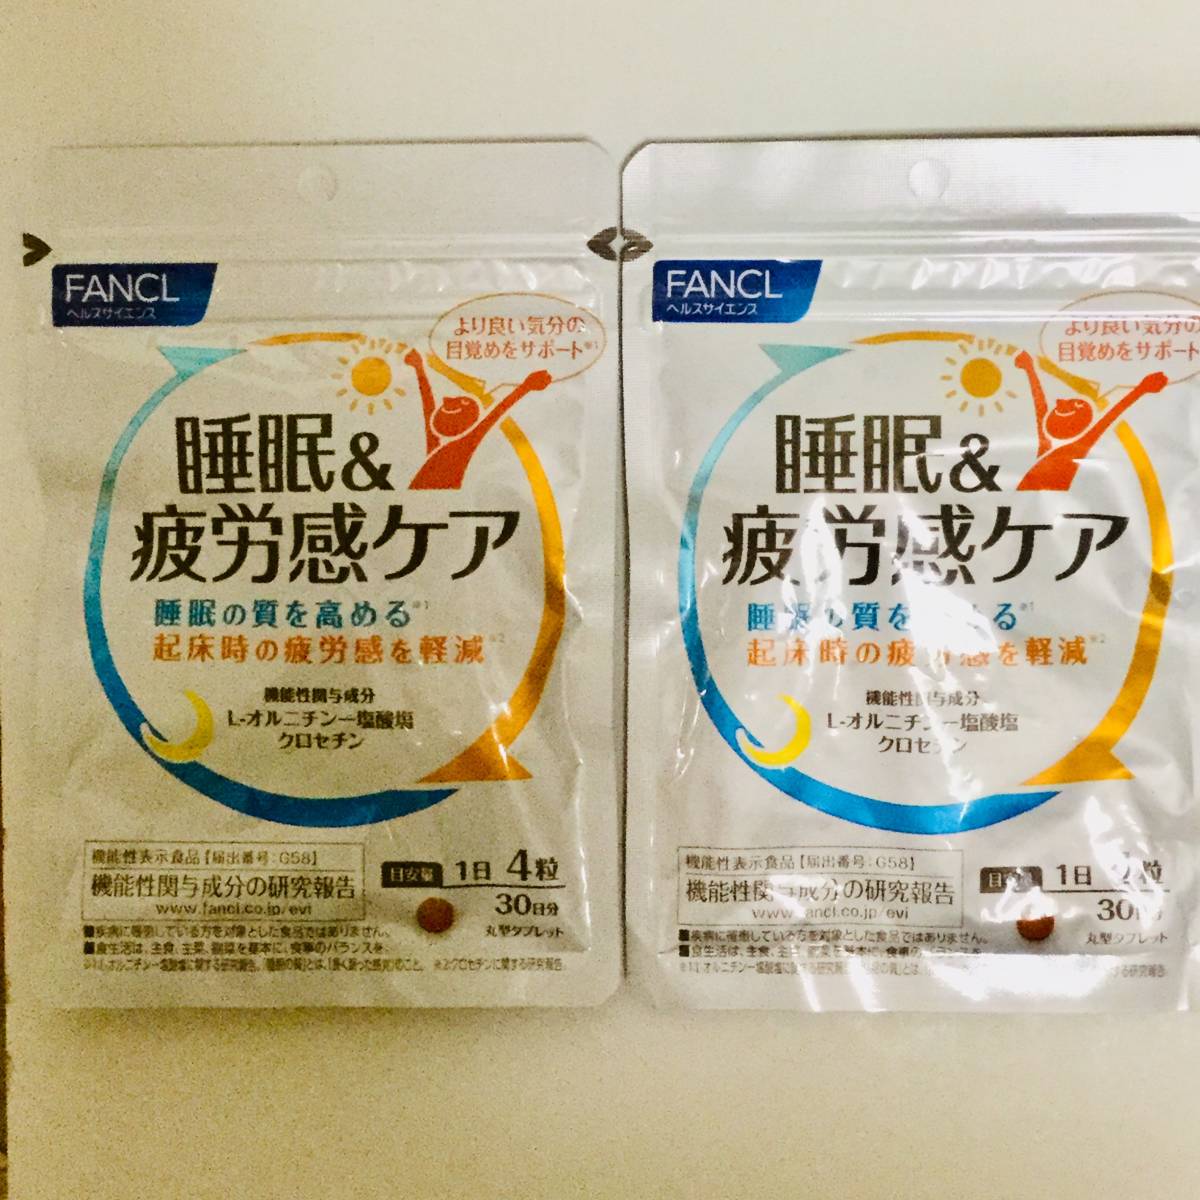 * new goods *FANCL Fancl sleeping & fatigue feeling care 30 day minute (120 bead )×2 sack set #yaf cat anonymity delivery correspondence : postage 180 jpy ~